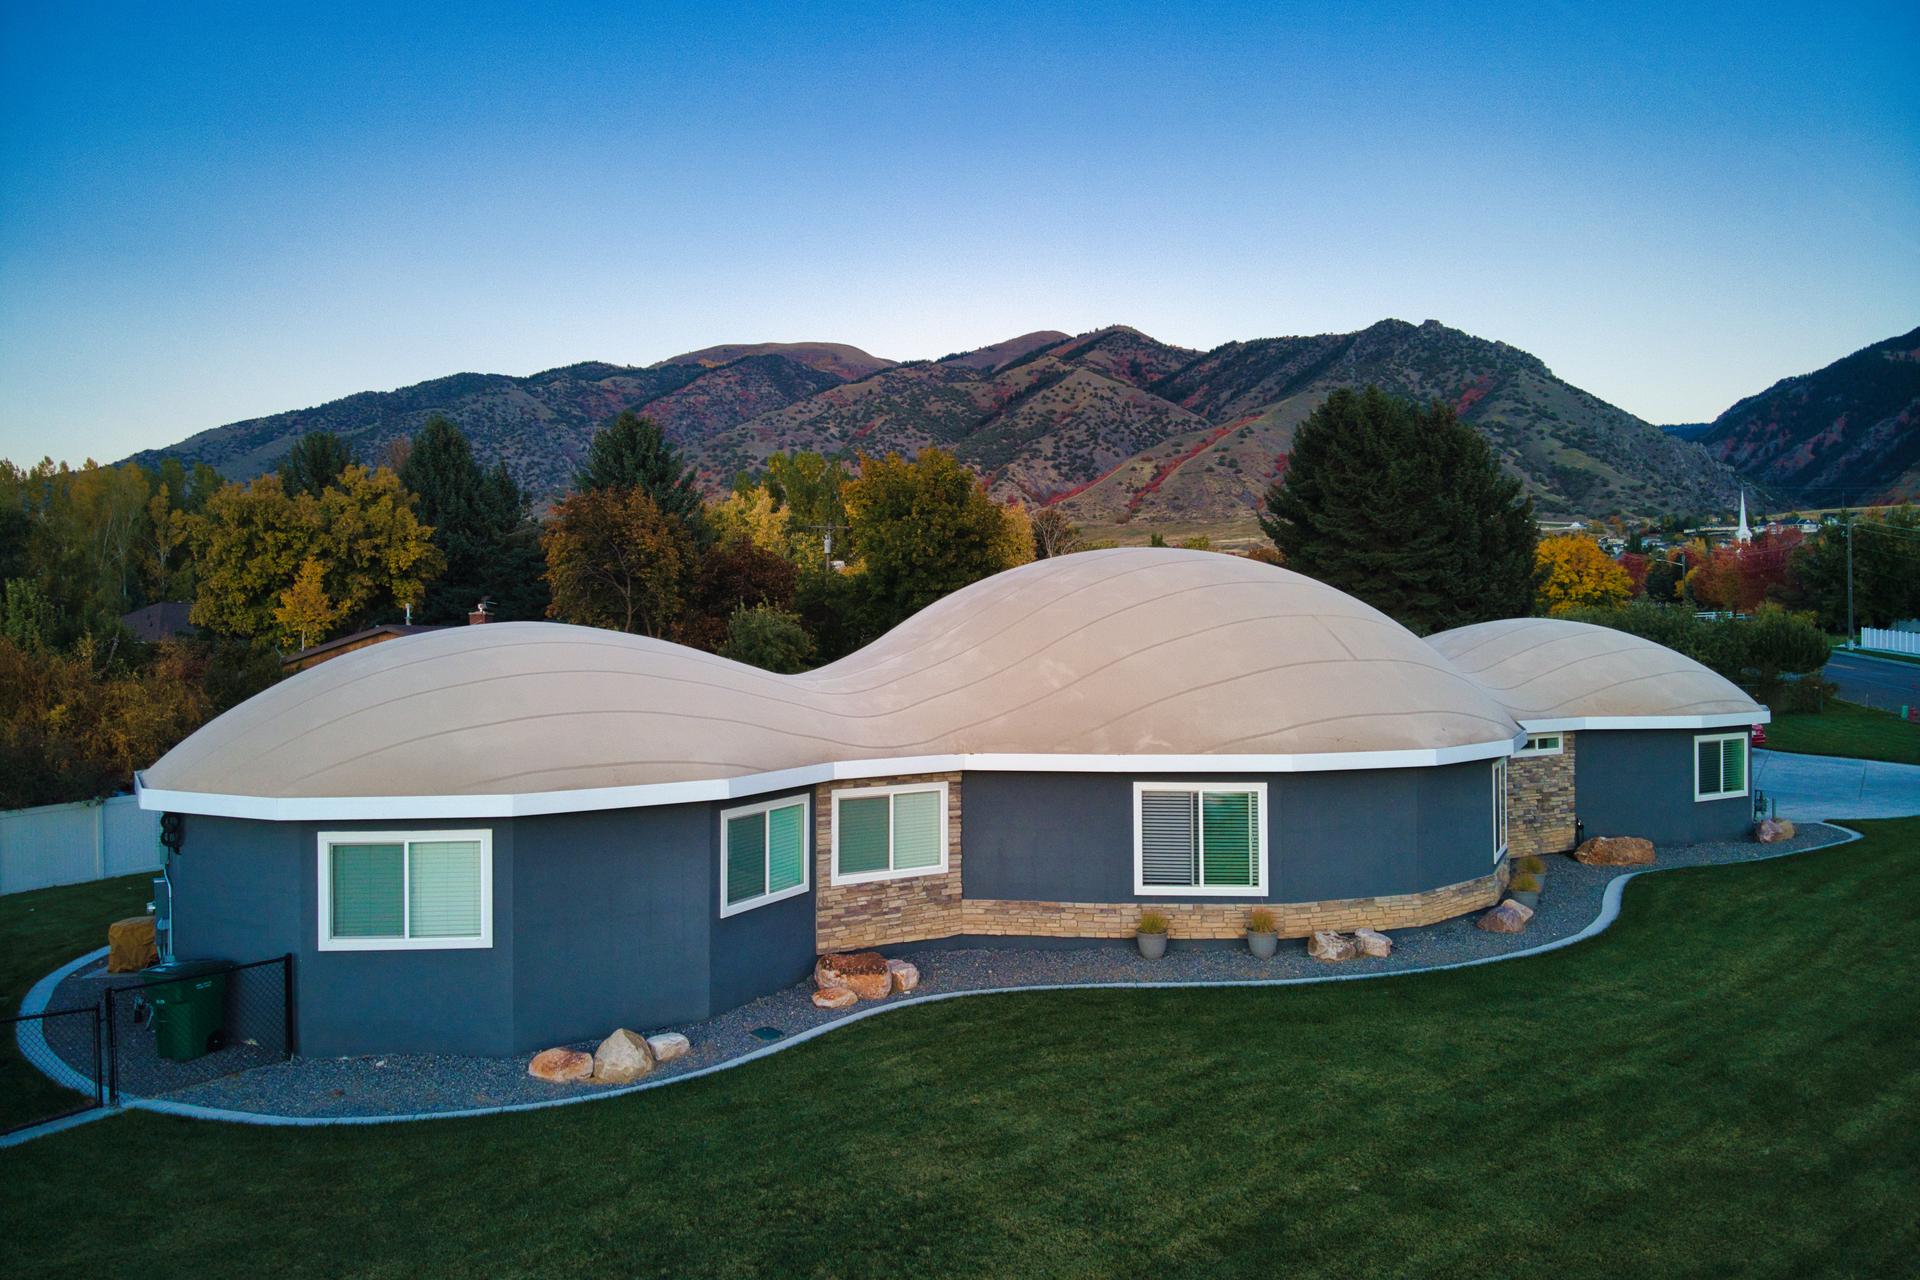 Fall Colors Surround Arcadia Dome Home.